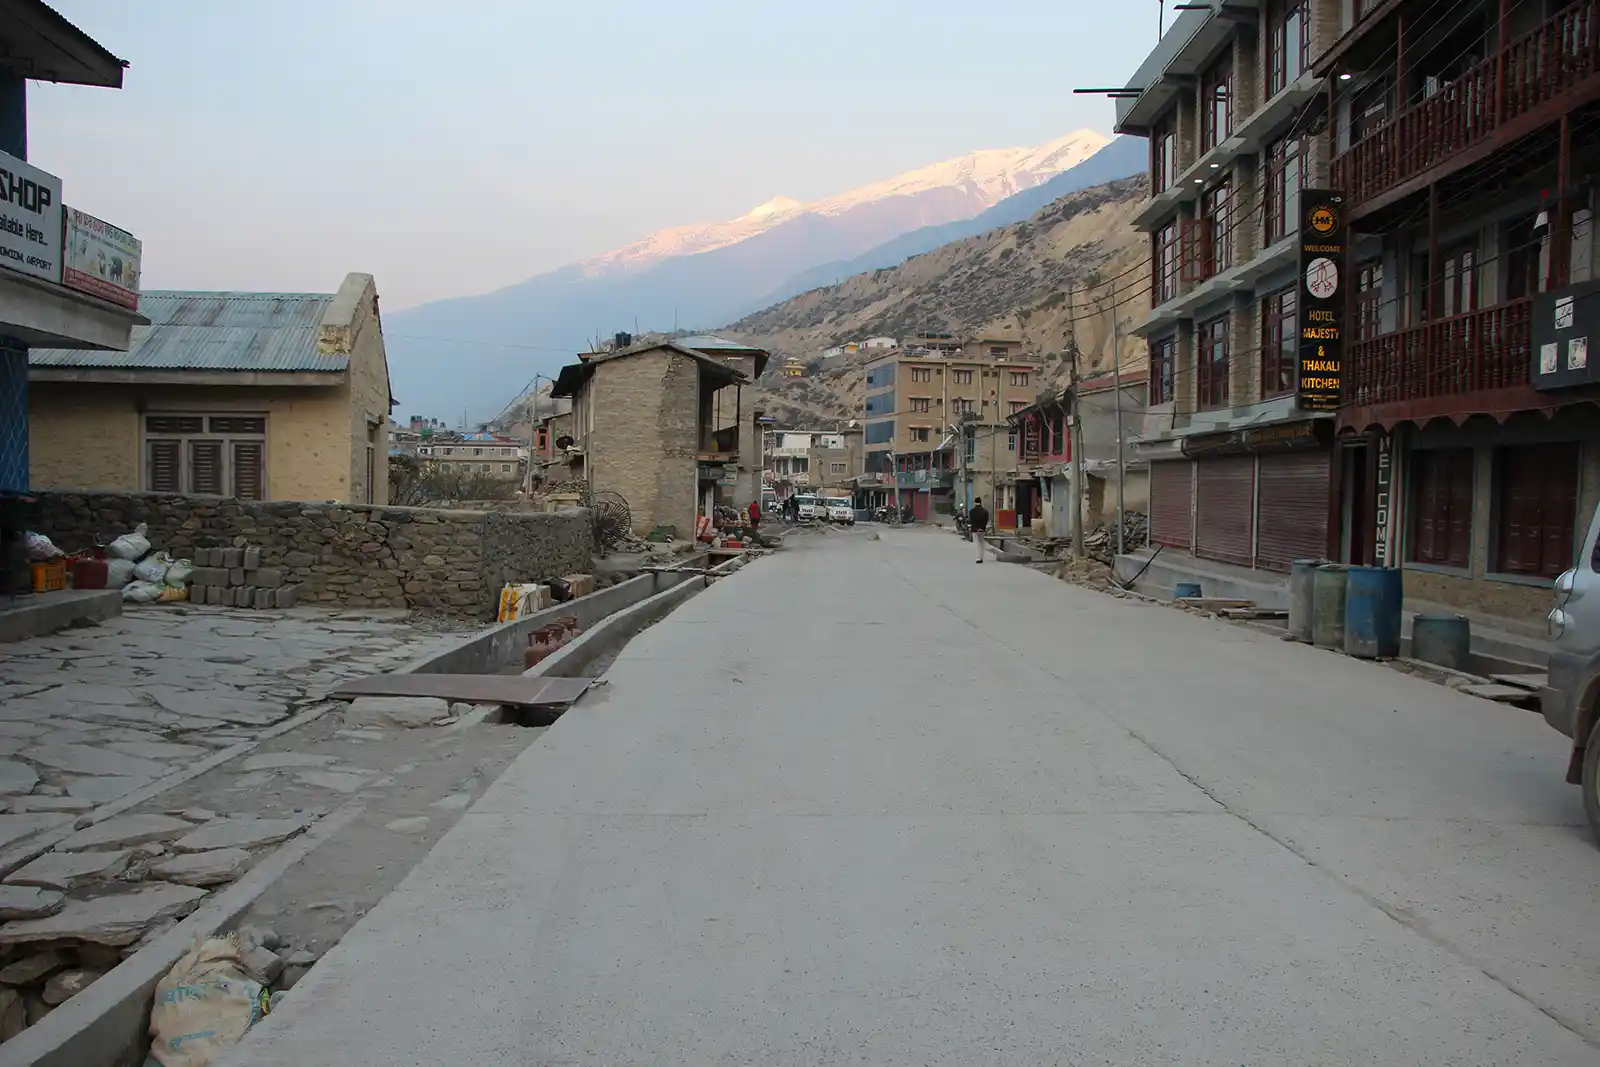 Jomsom Bazar - You will see this bazar during Muktinath Tour